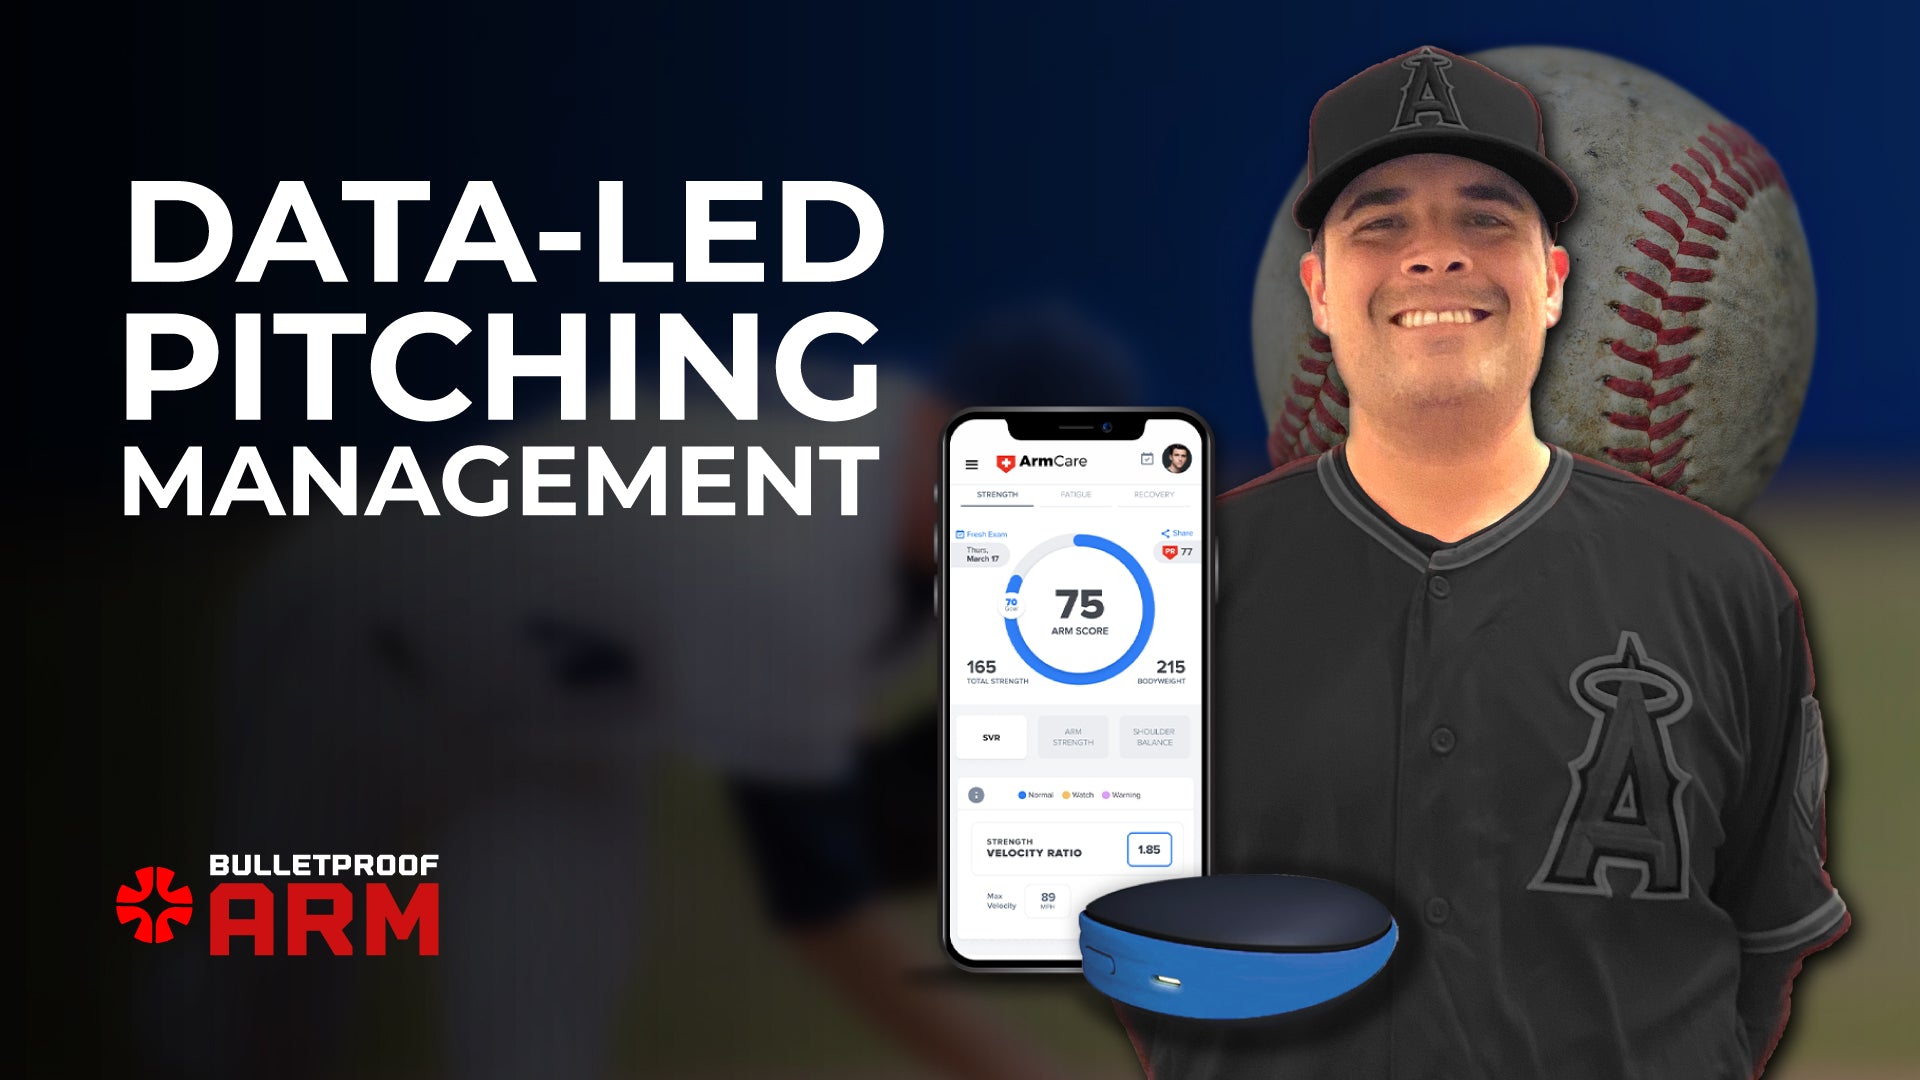 Bulletproof Arm Series - Data-Led Pitching Management